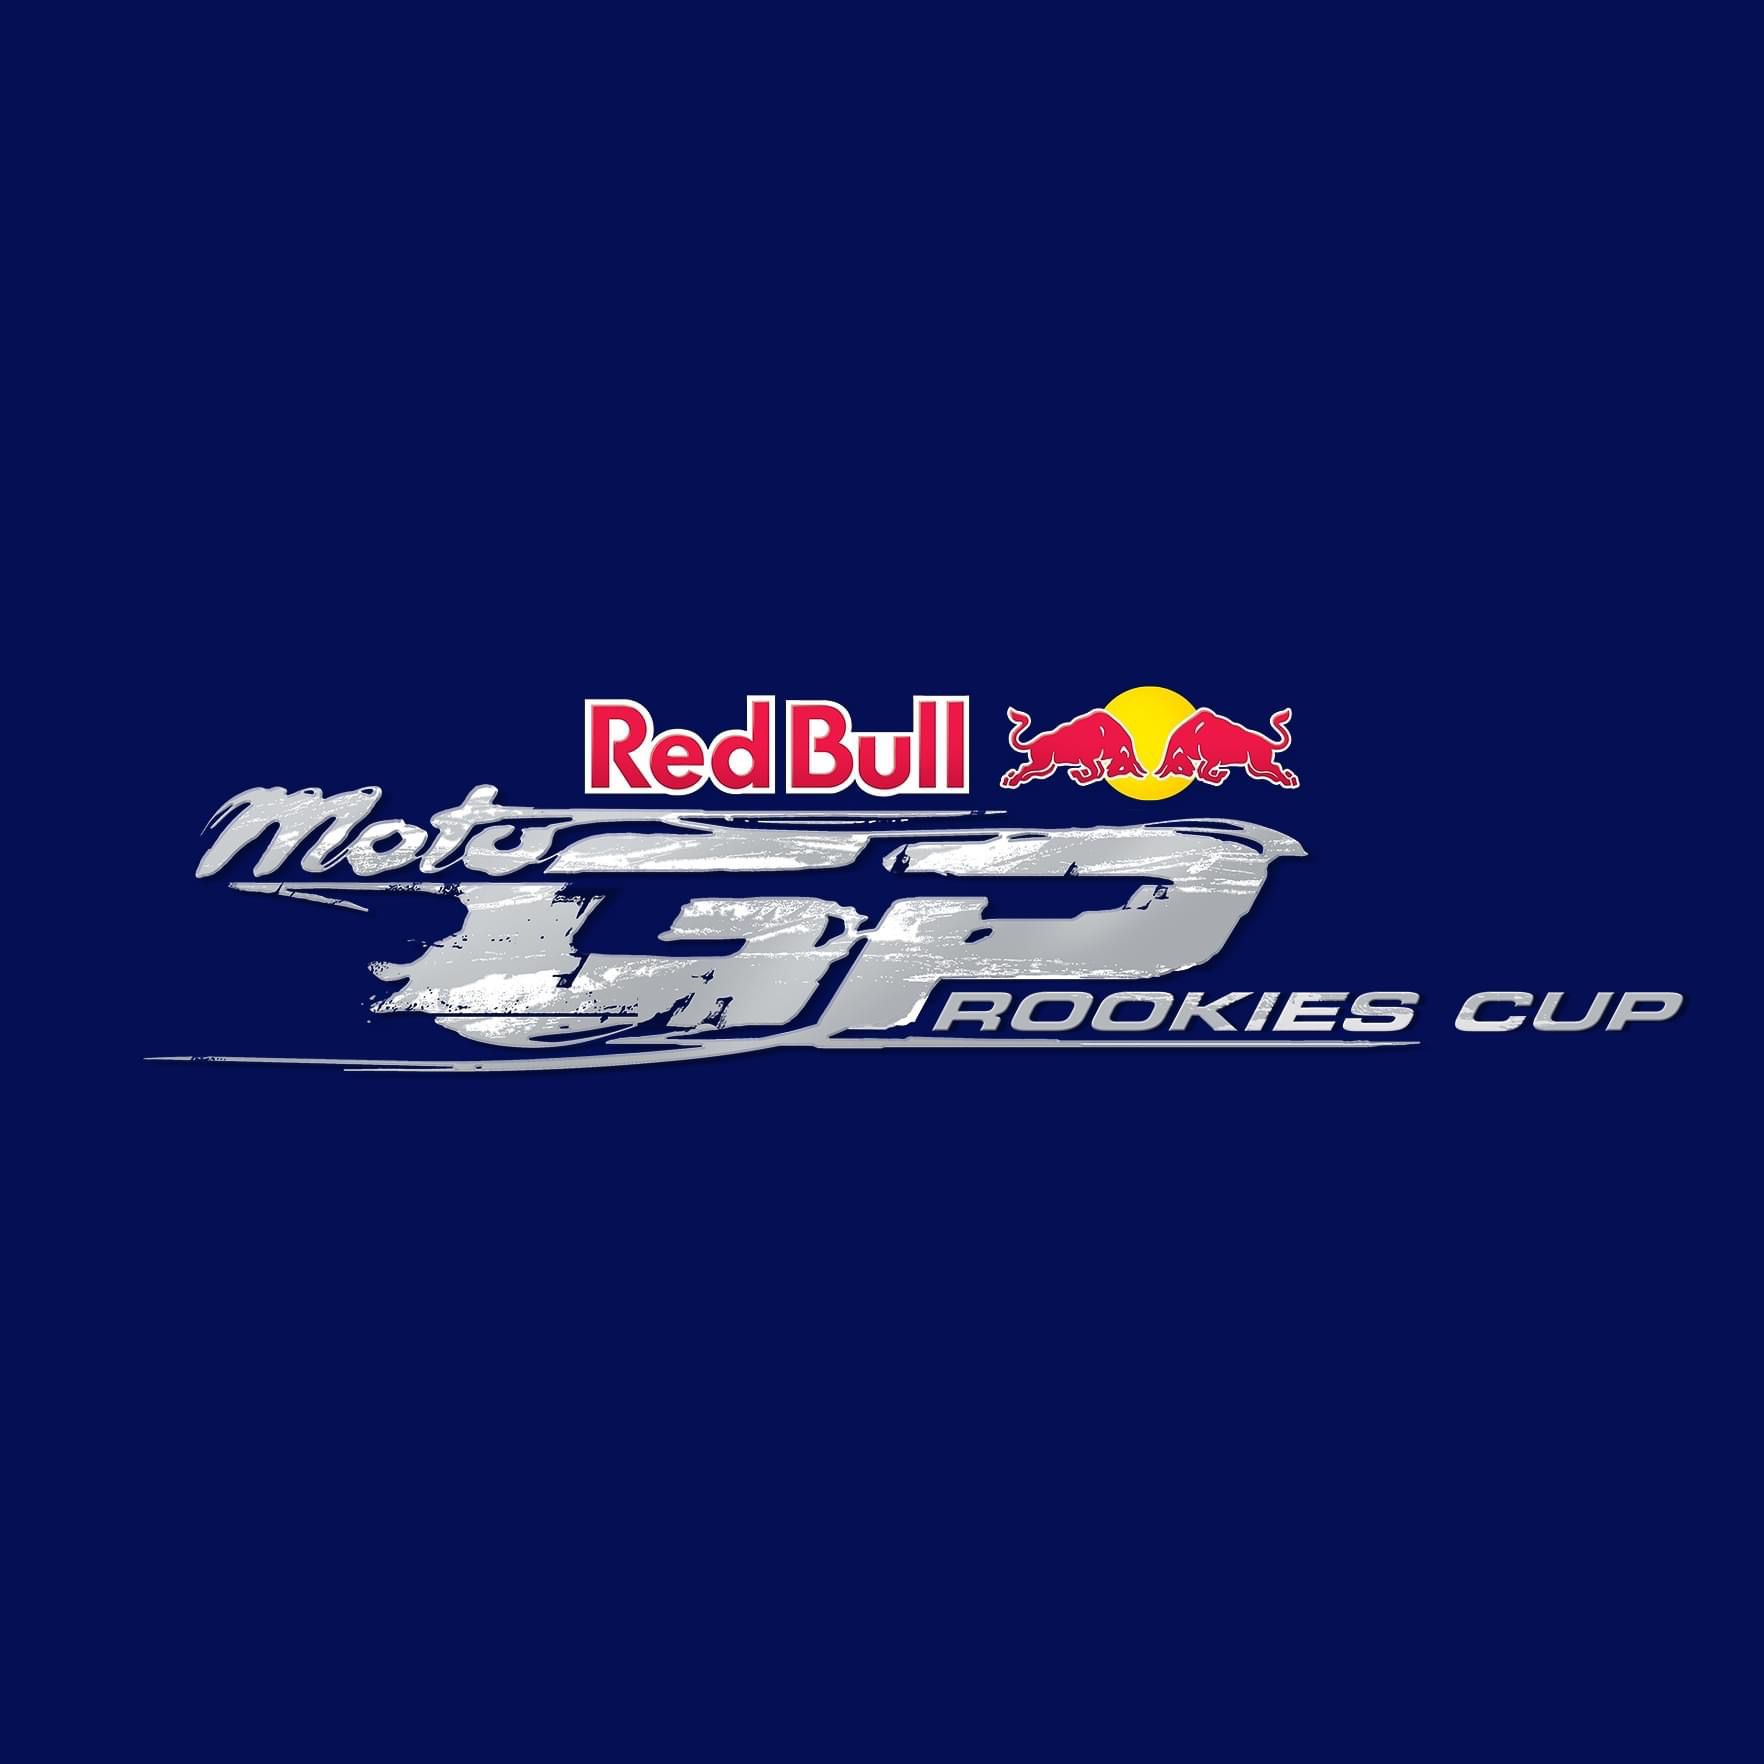 Red Bull Rookies Cup's trials for Erik Michielon